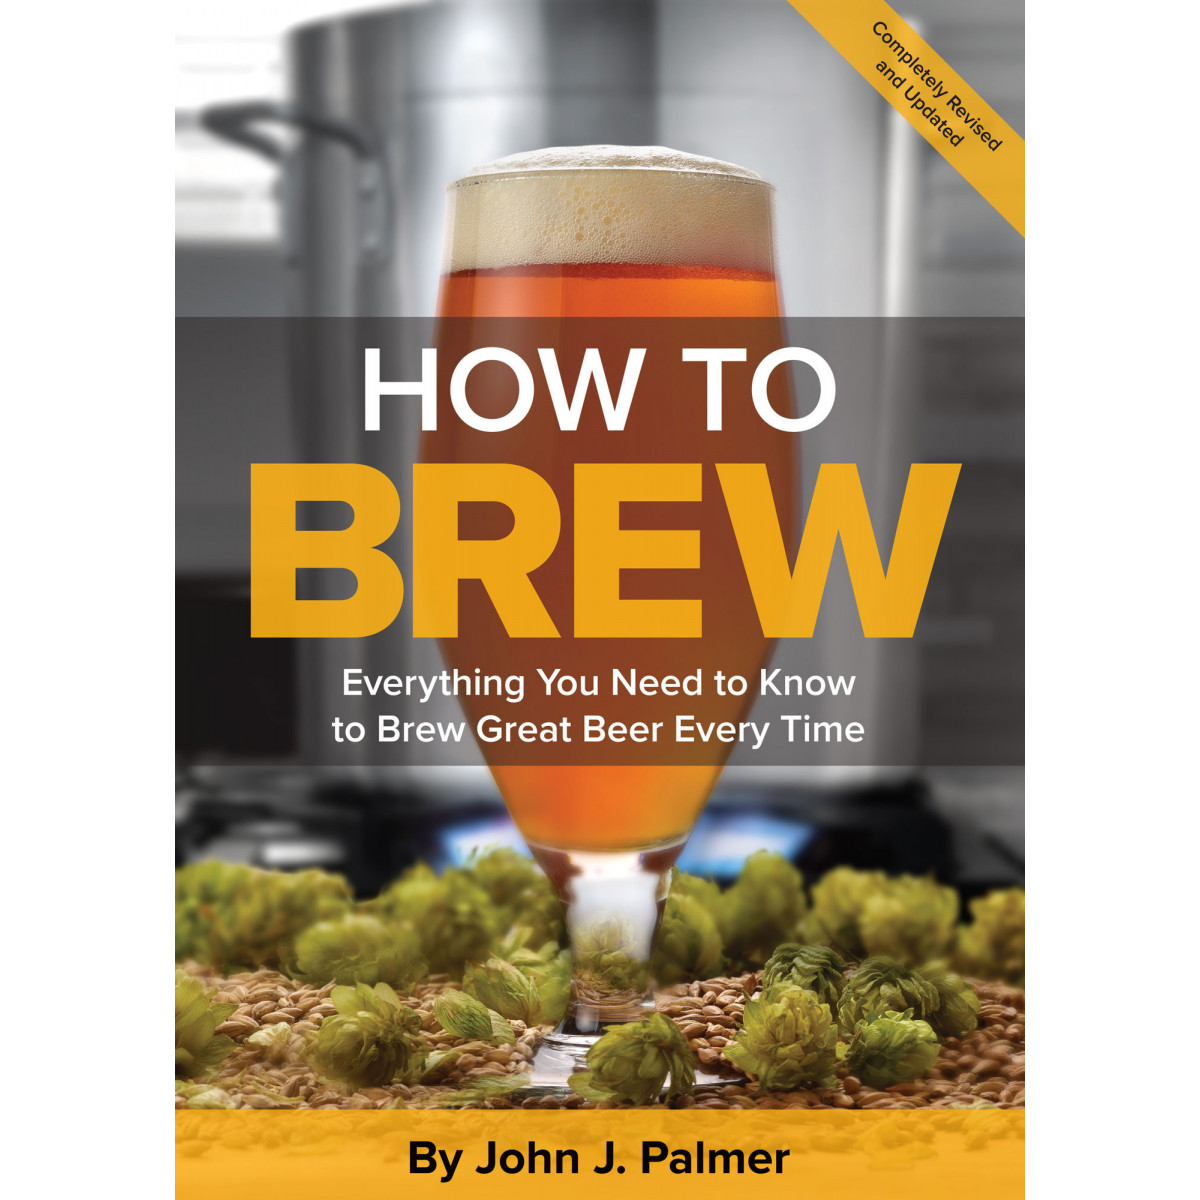 How to brew - J. Palmer - 4th edition